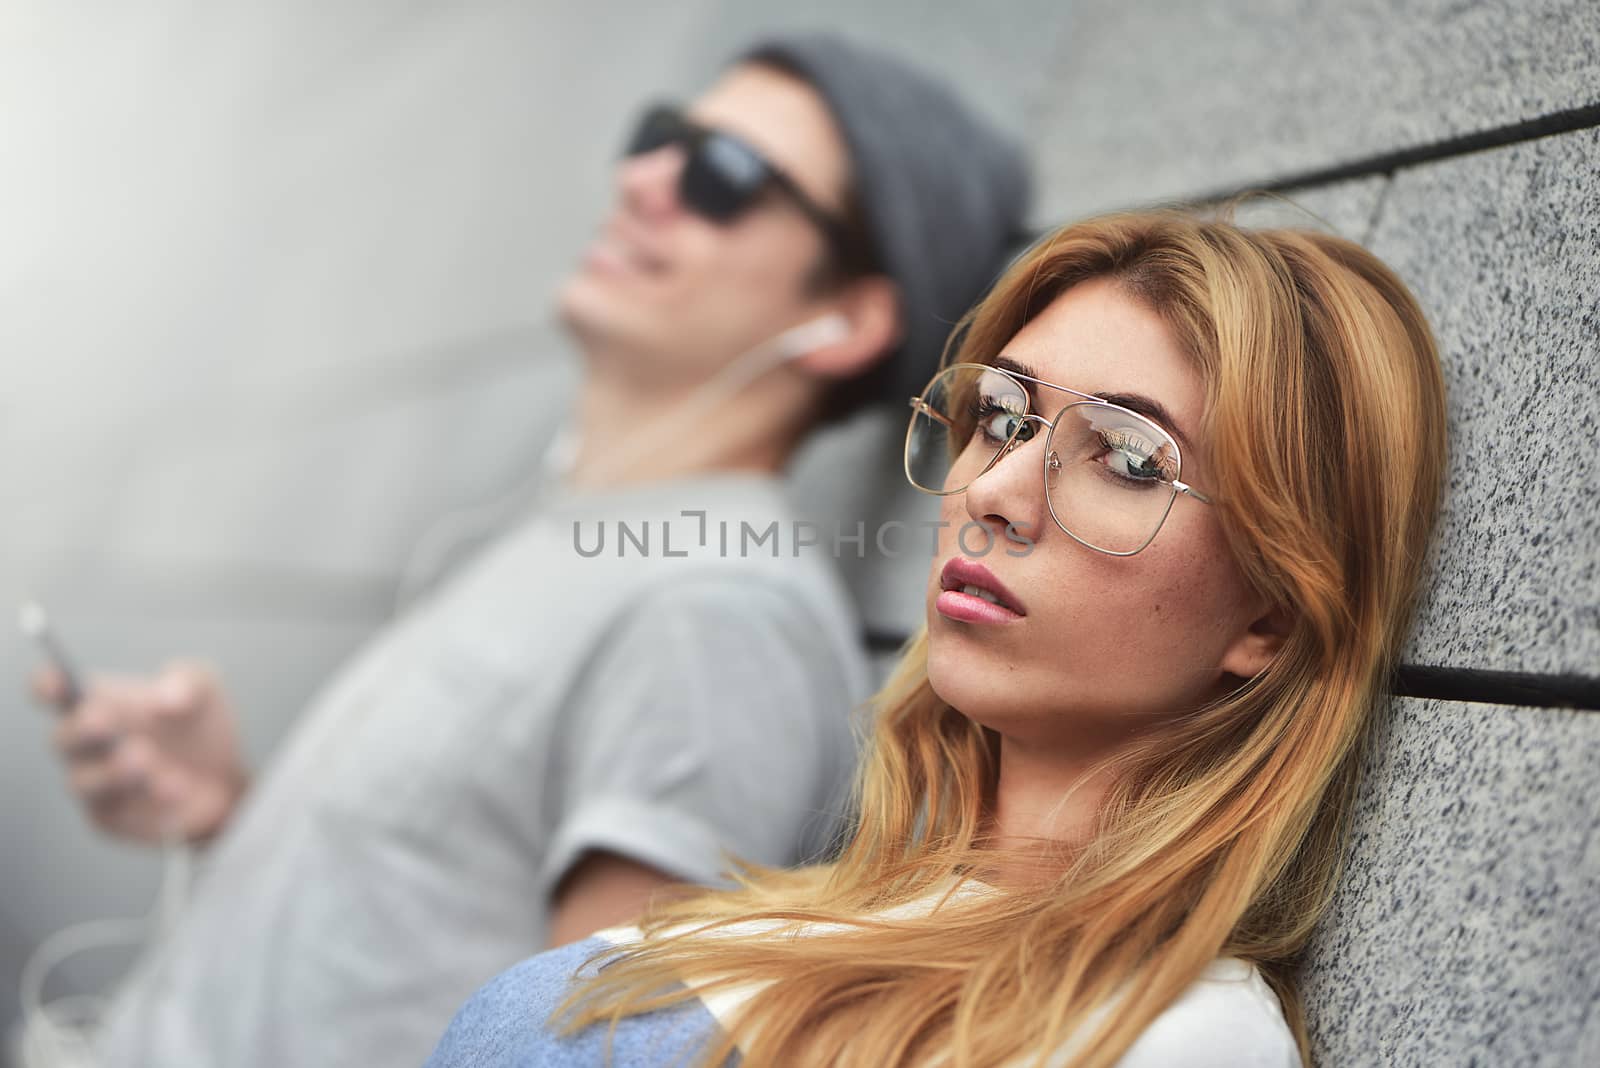 Portrait of Young attractive couple listening to music on the same pair of headphones, dressed in stylish clothes against a background of a gray wall.